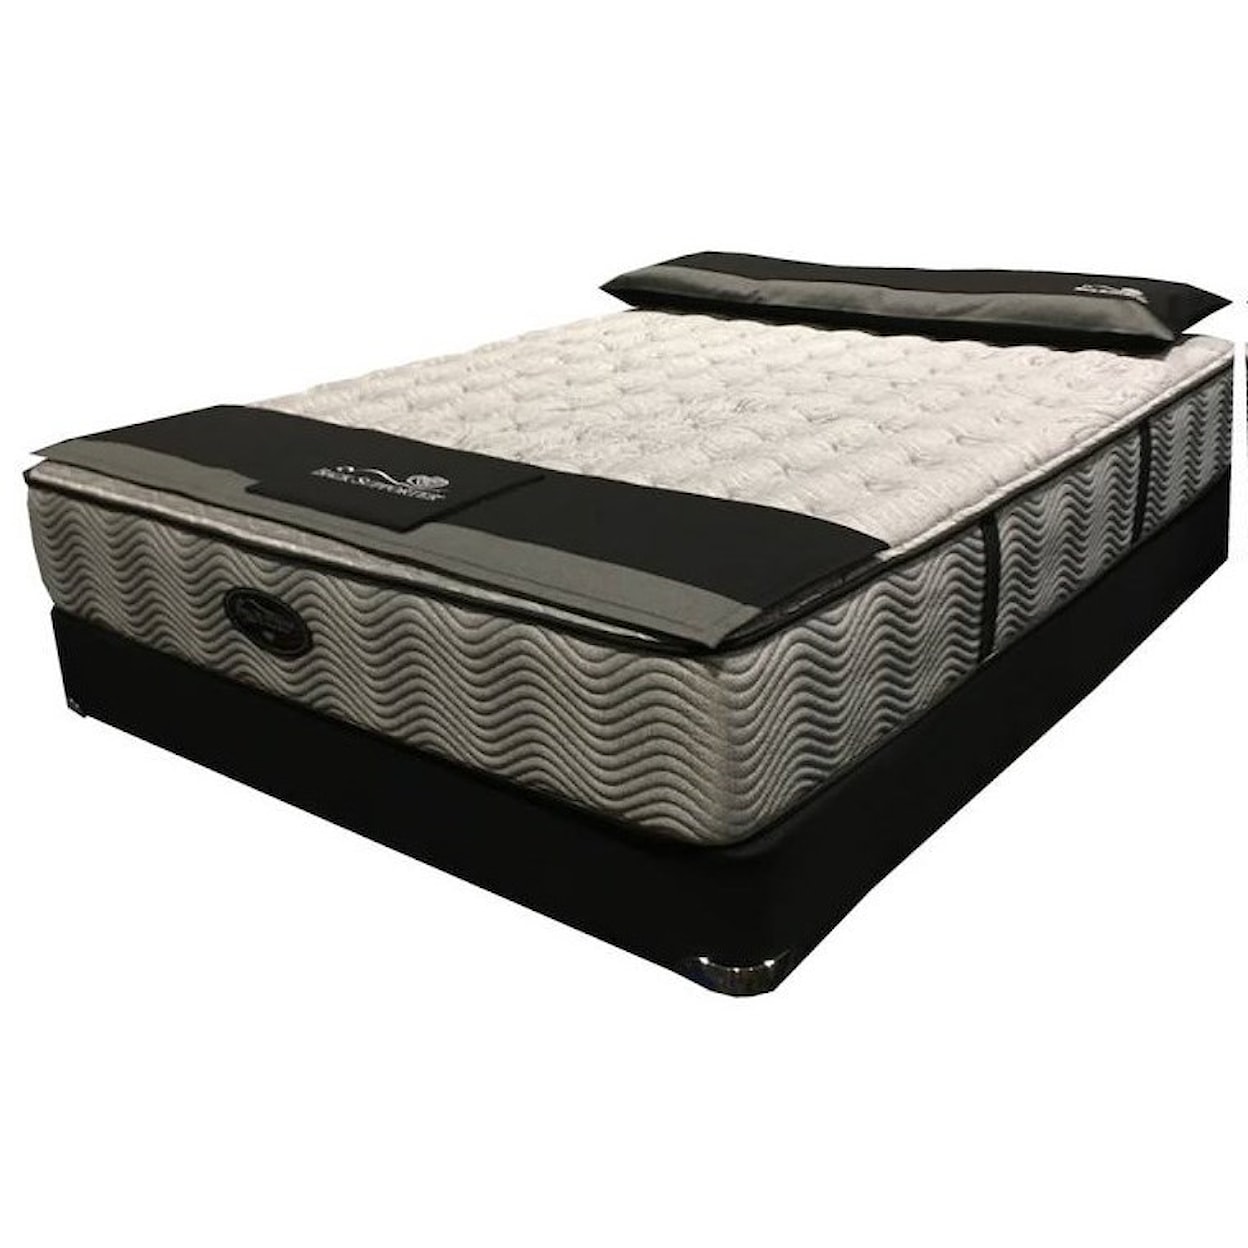 Spring Air Breanna SF King Pocketed Coil Low Pro Mattress Set